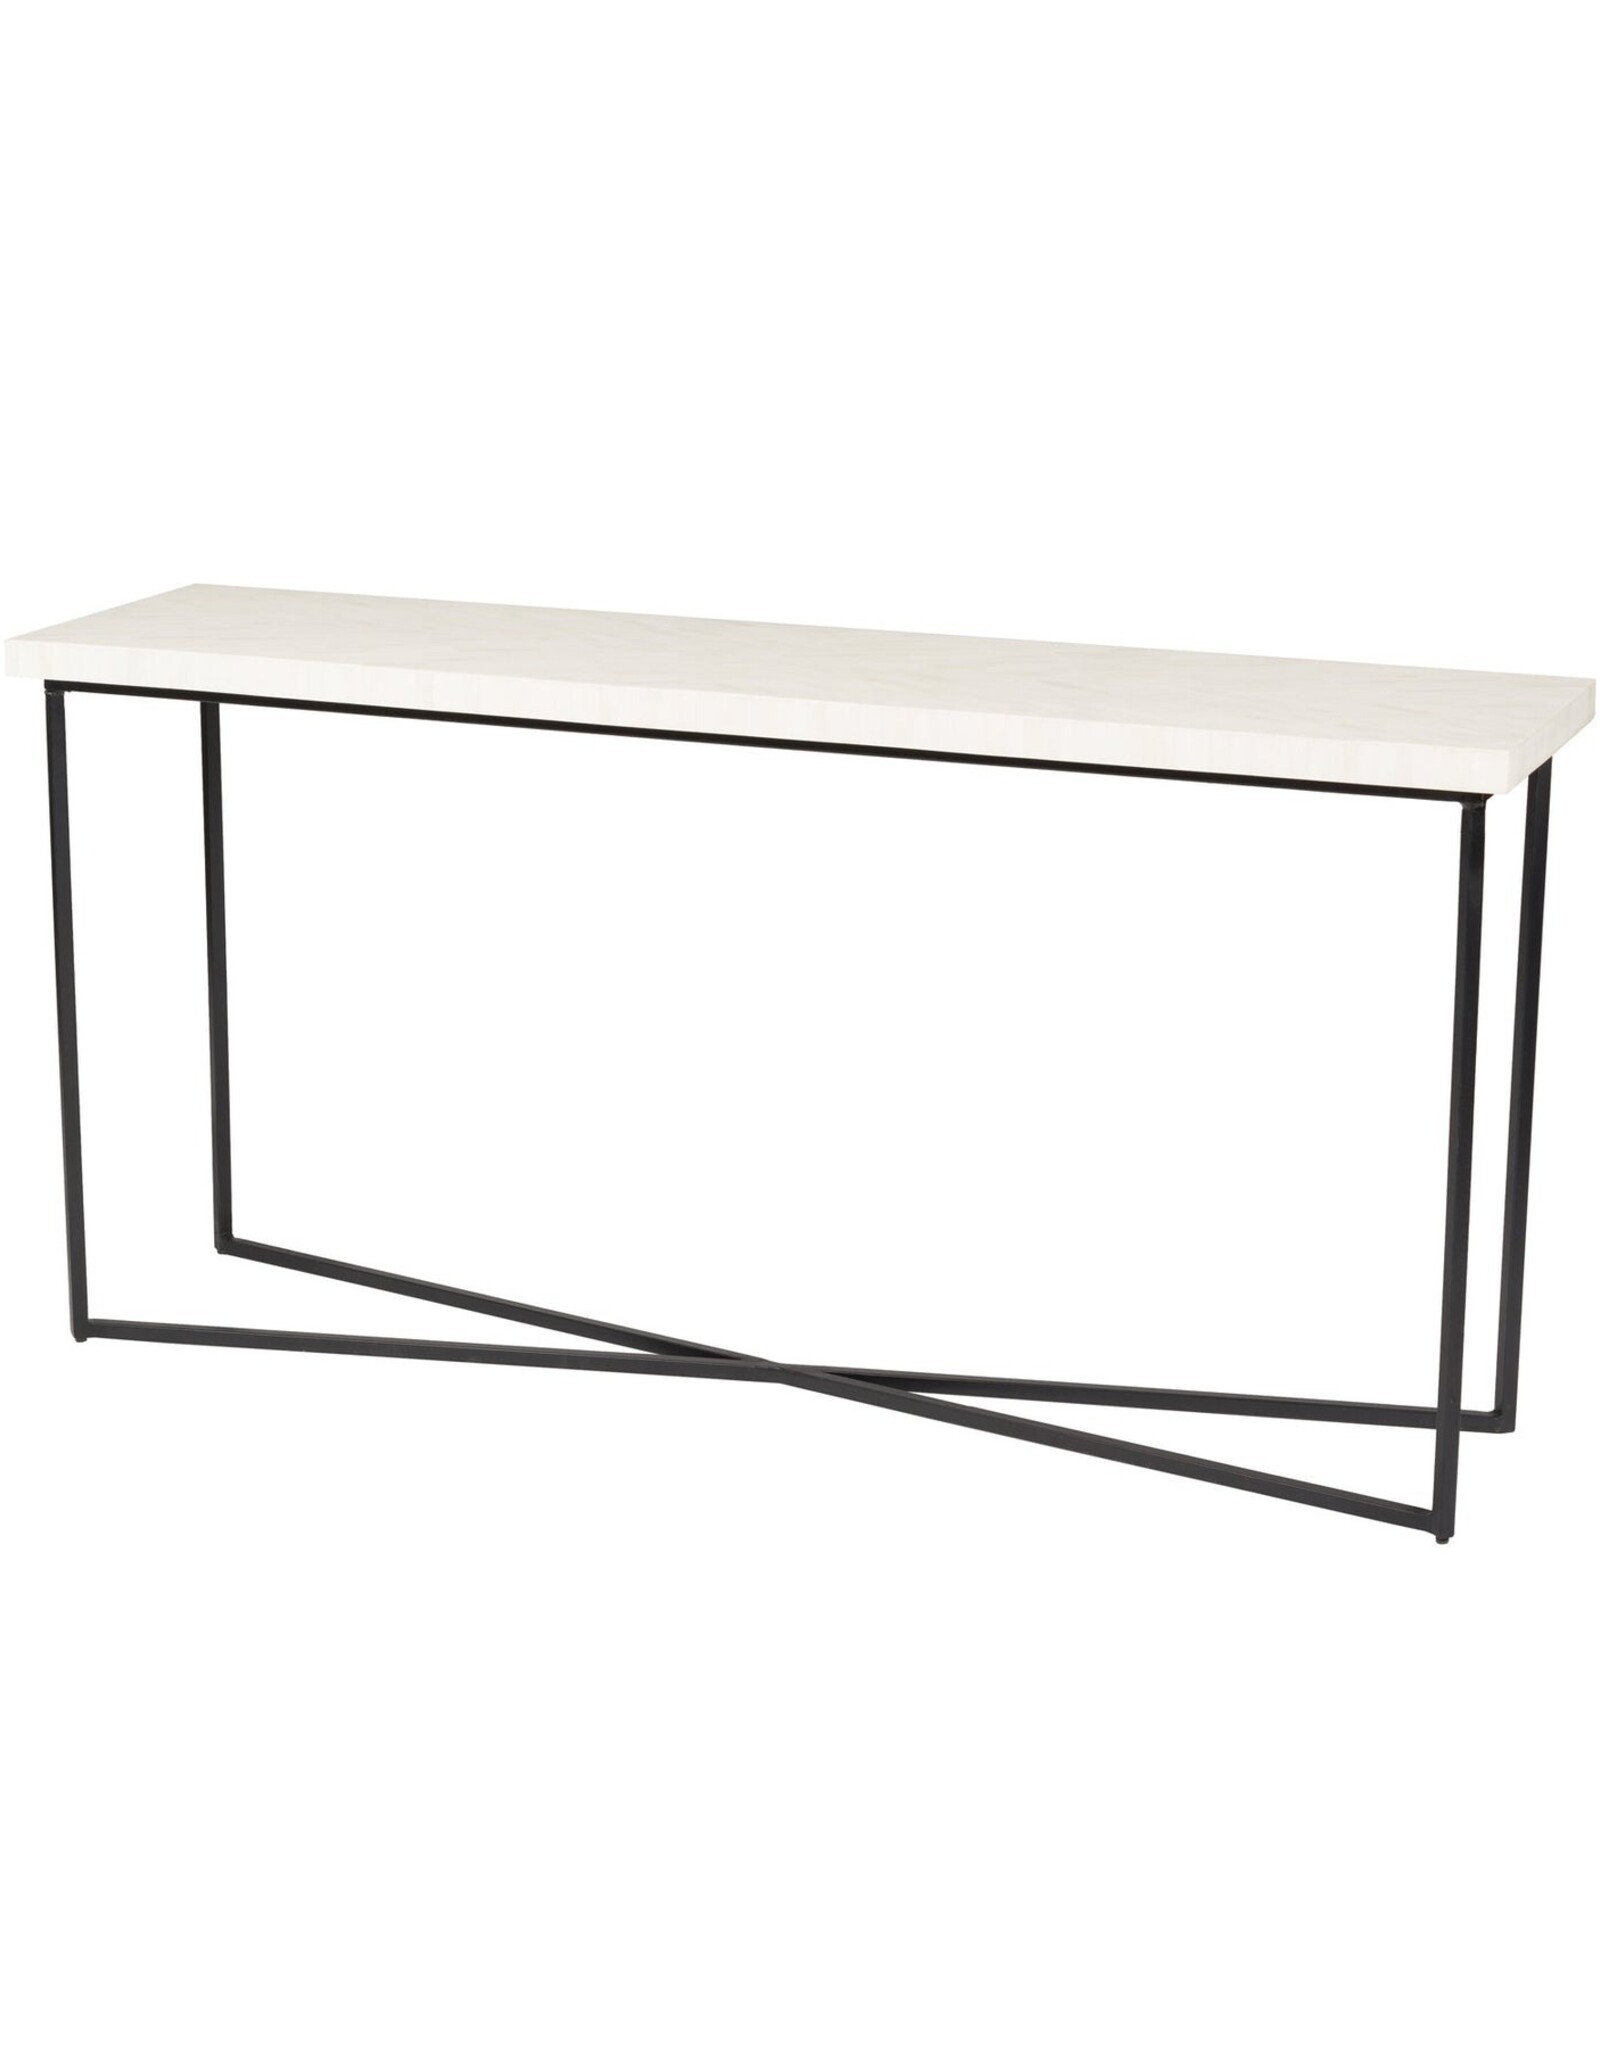 LH Imports 5th Avenue Console Table